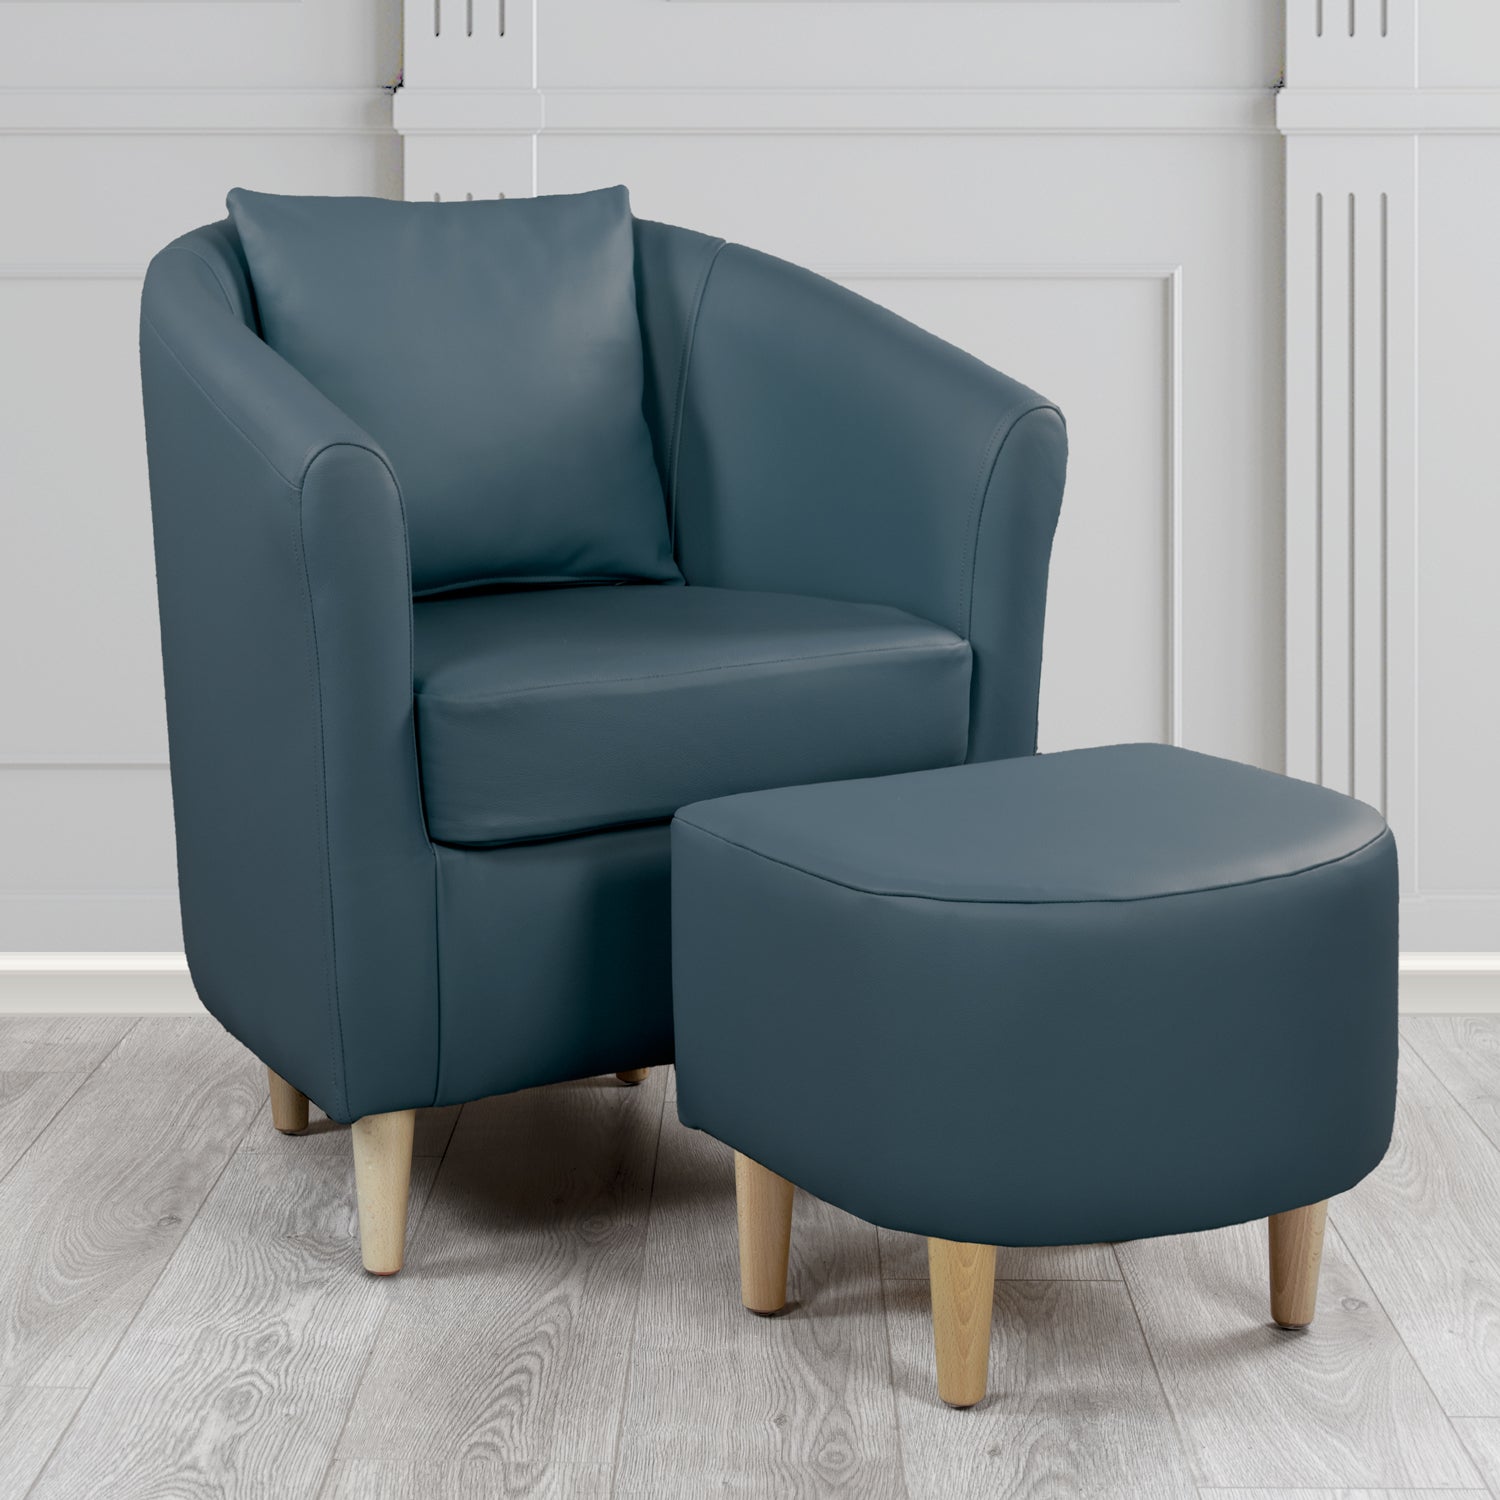 St Tropez Shelly Suffolk Blue Crib 5 Genuine Leather Tub Chair & Footstool Set With Scatter Cushion (6619541700650)